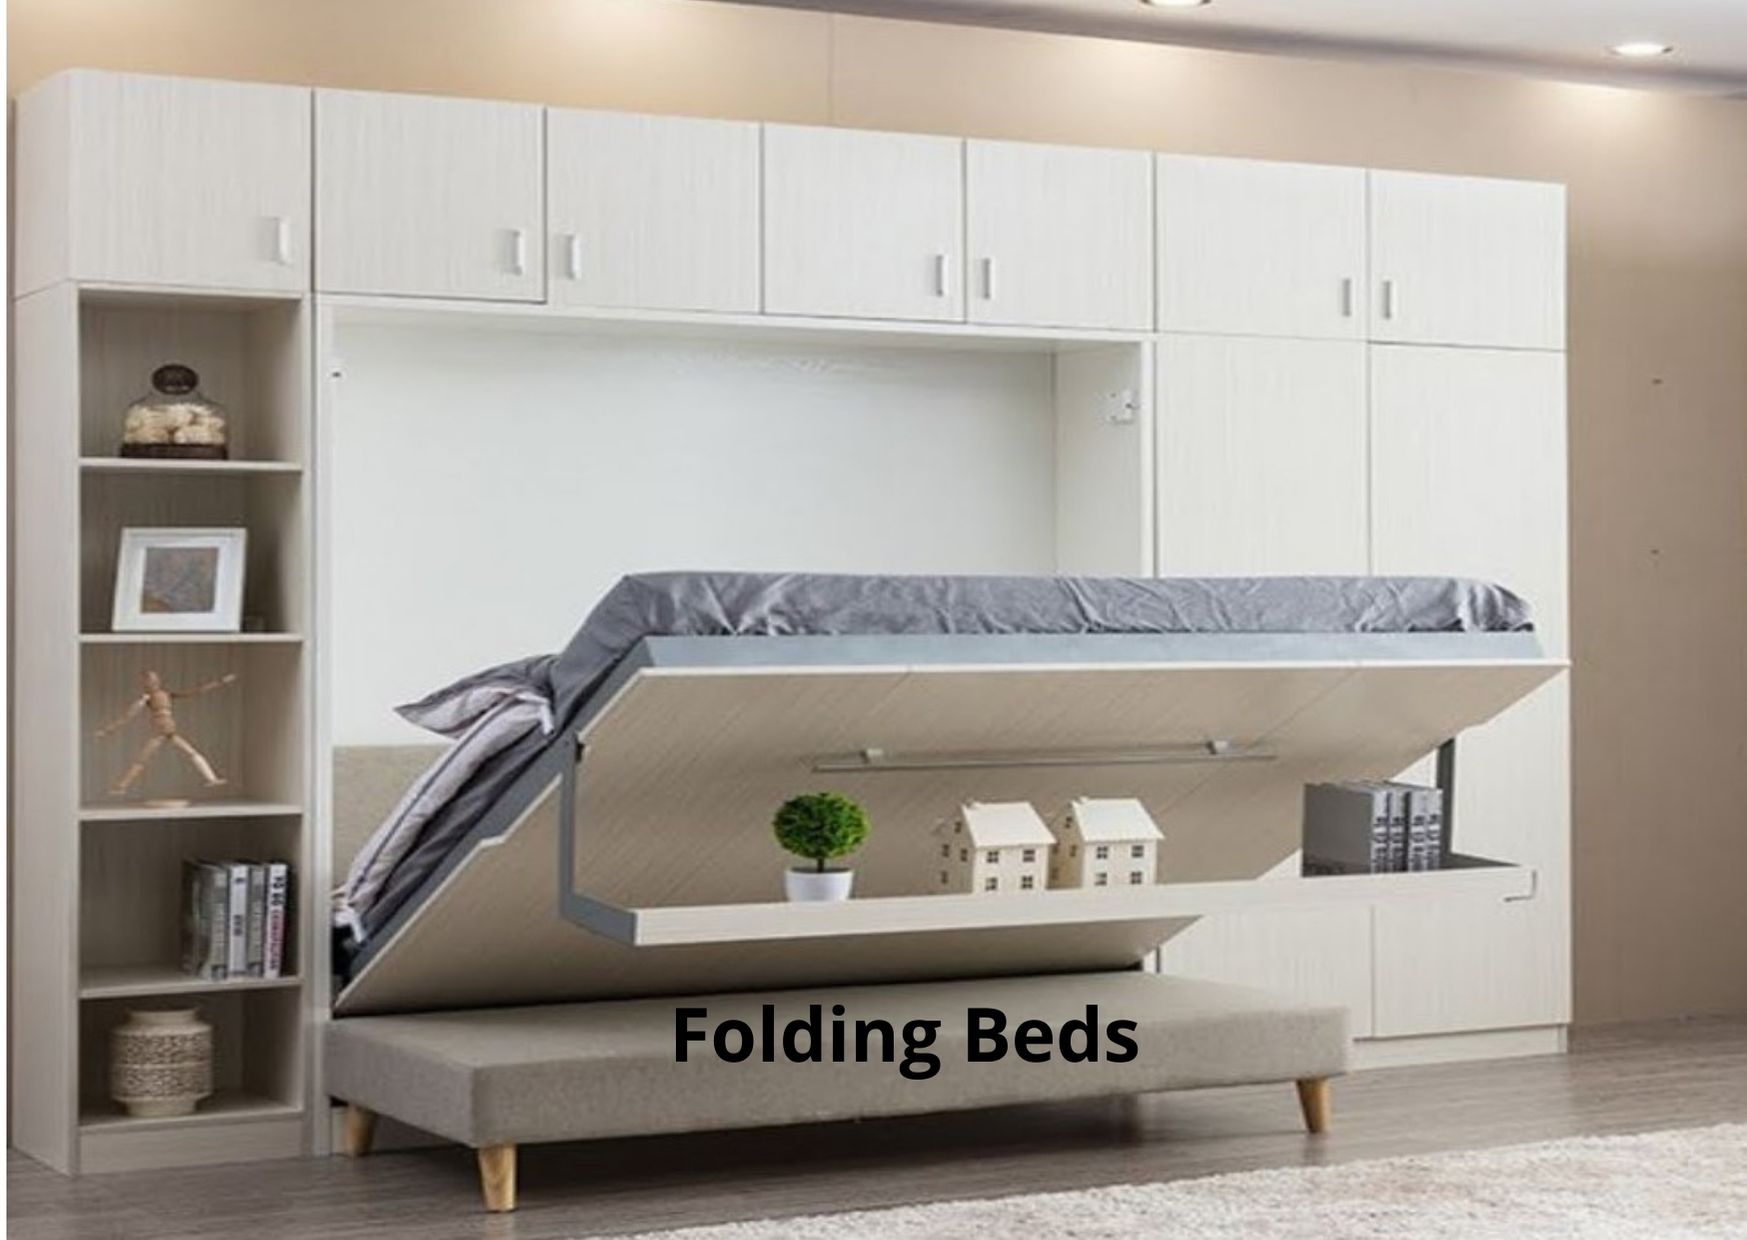 Top reasons that Folding Beds are all the rage right now | 10 Tips